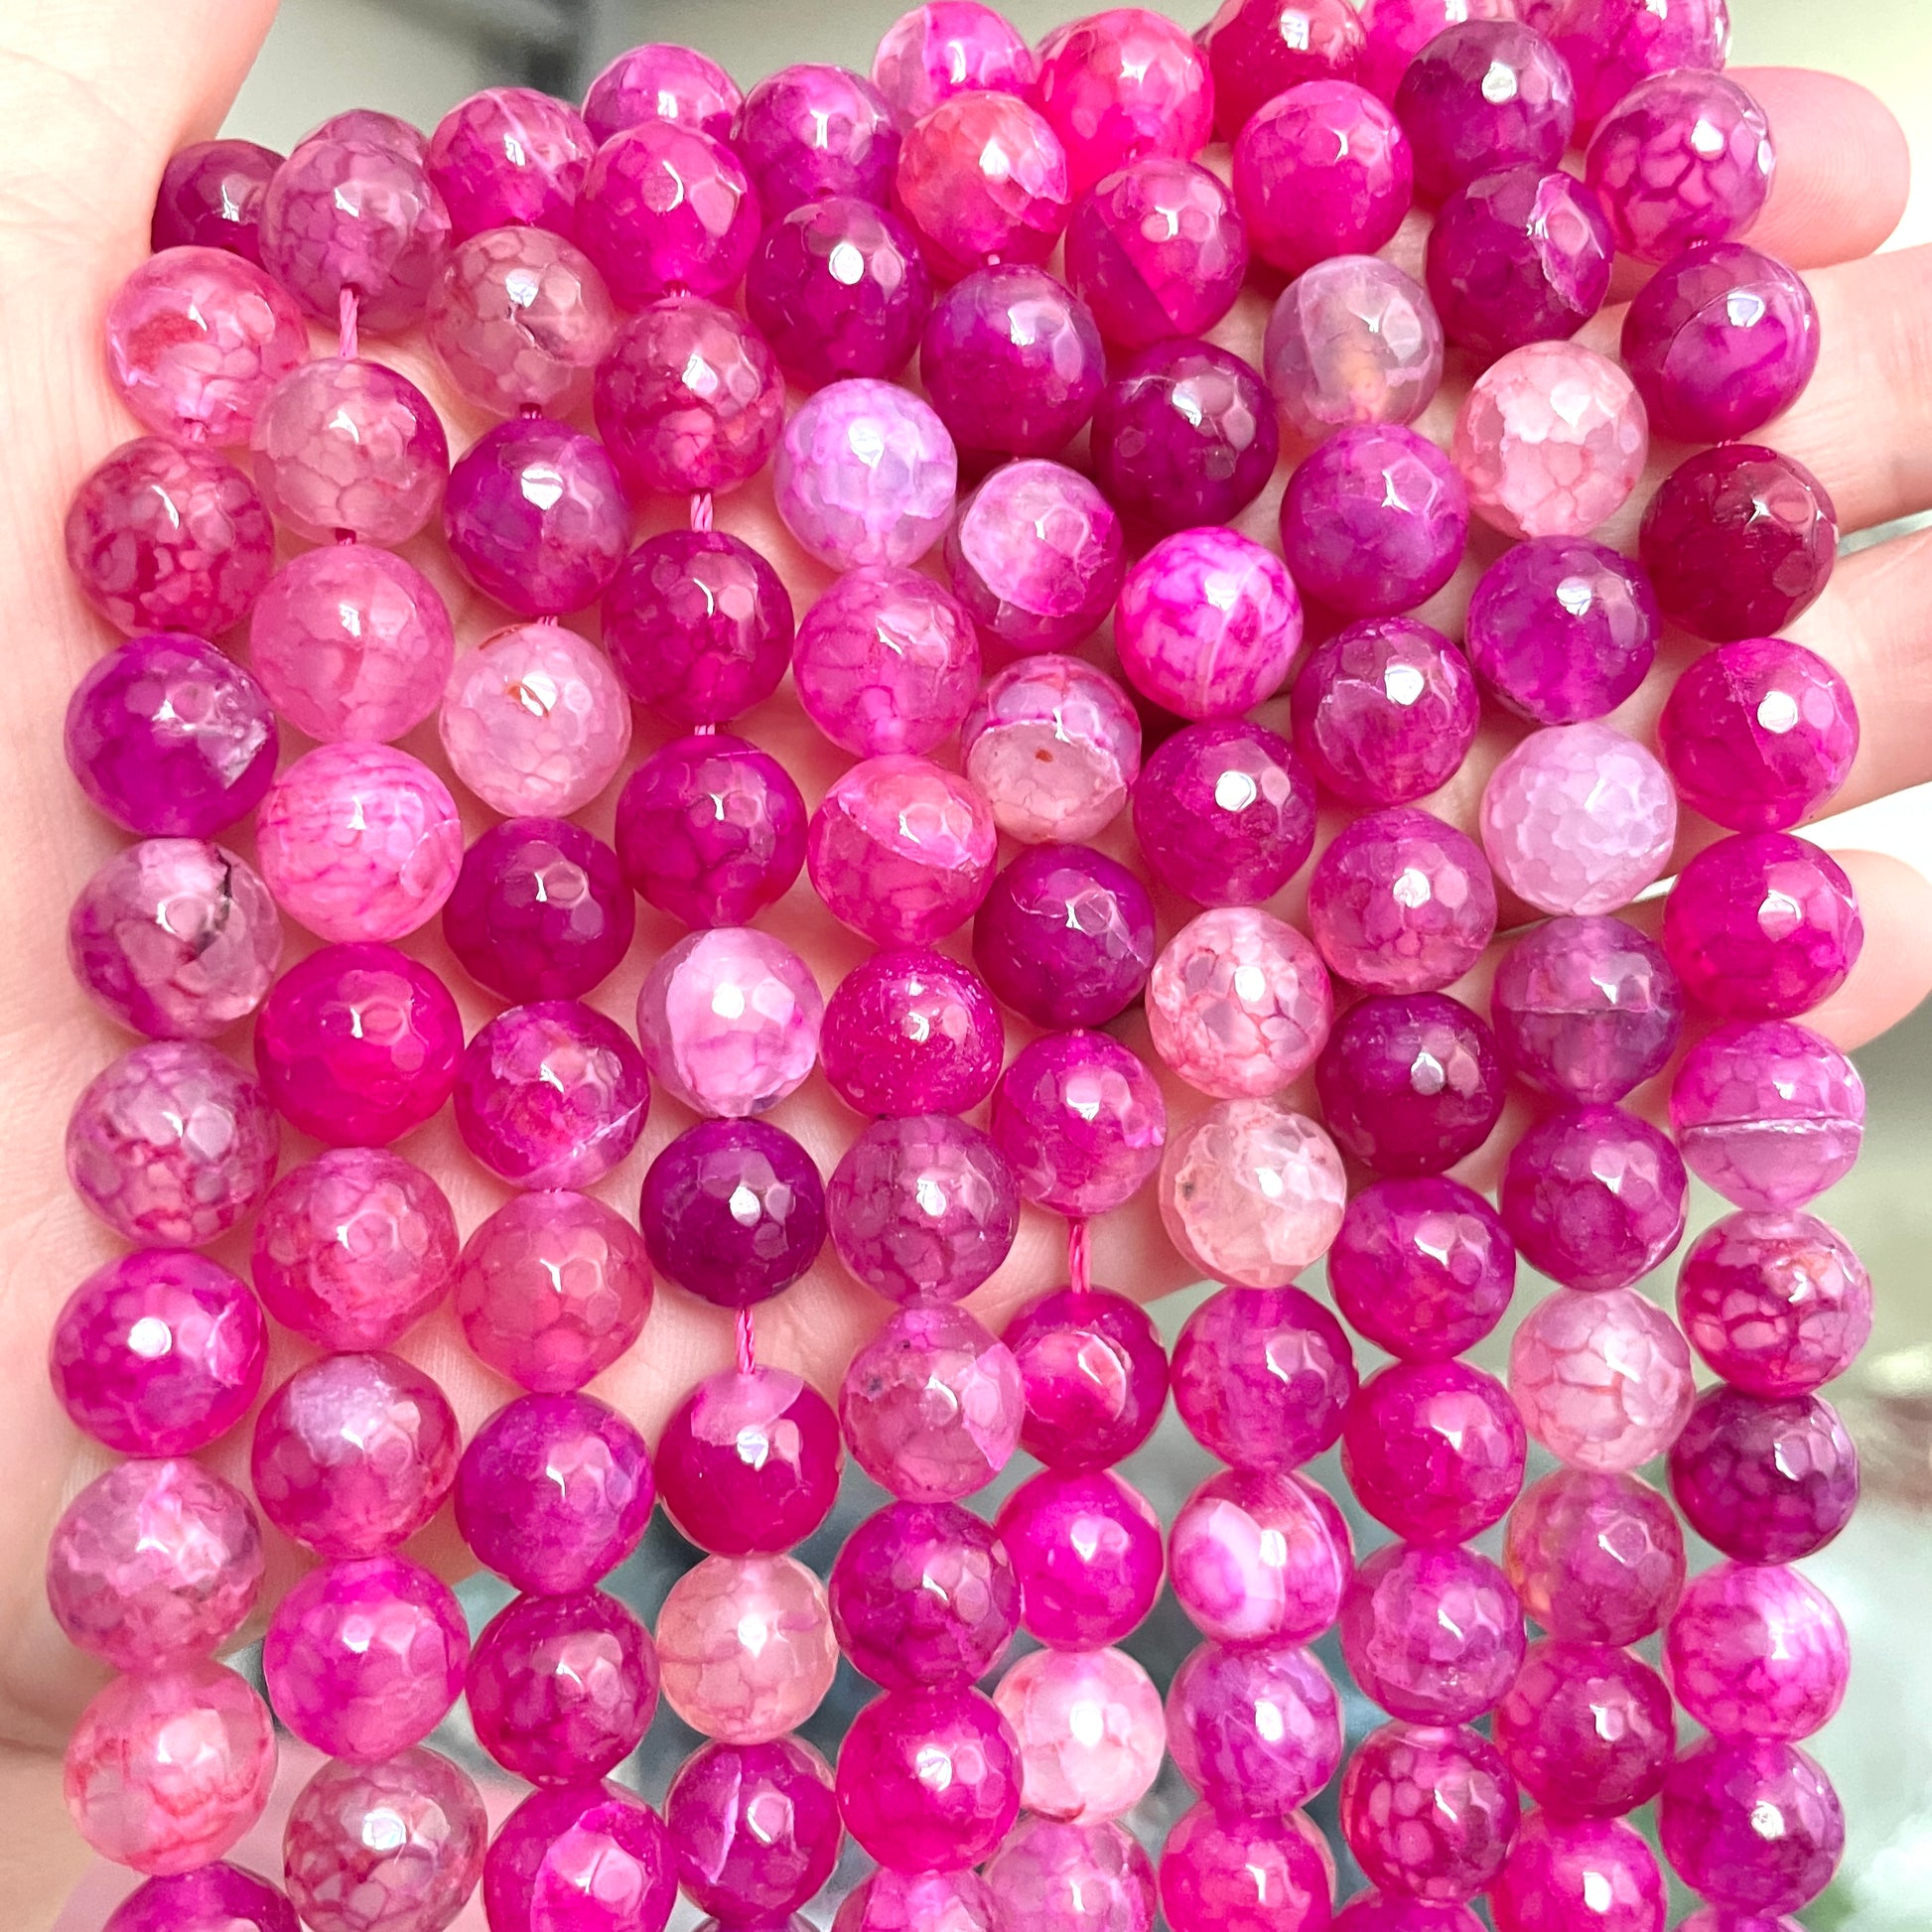 2 Strands/lot 10mm Hot Pink Fuchsia Dragon Agate Faceted Stone Beads Stone Beads Breast Cancer Awareness Faceted Agate Beads Charms Beads Beyond